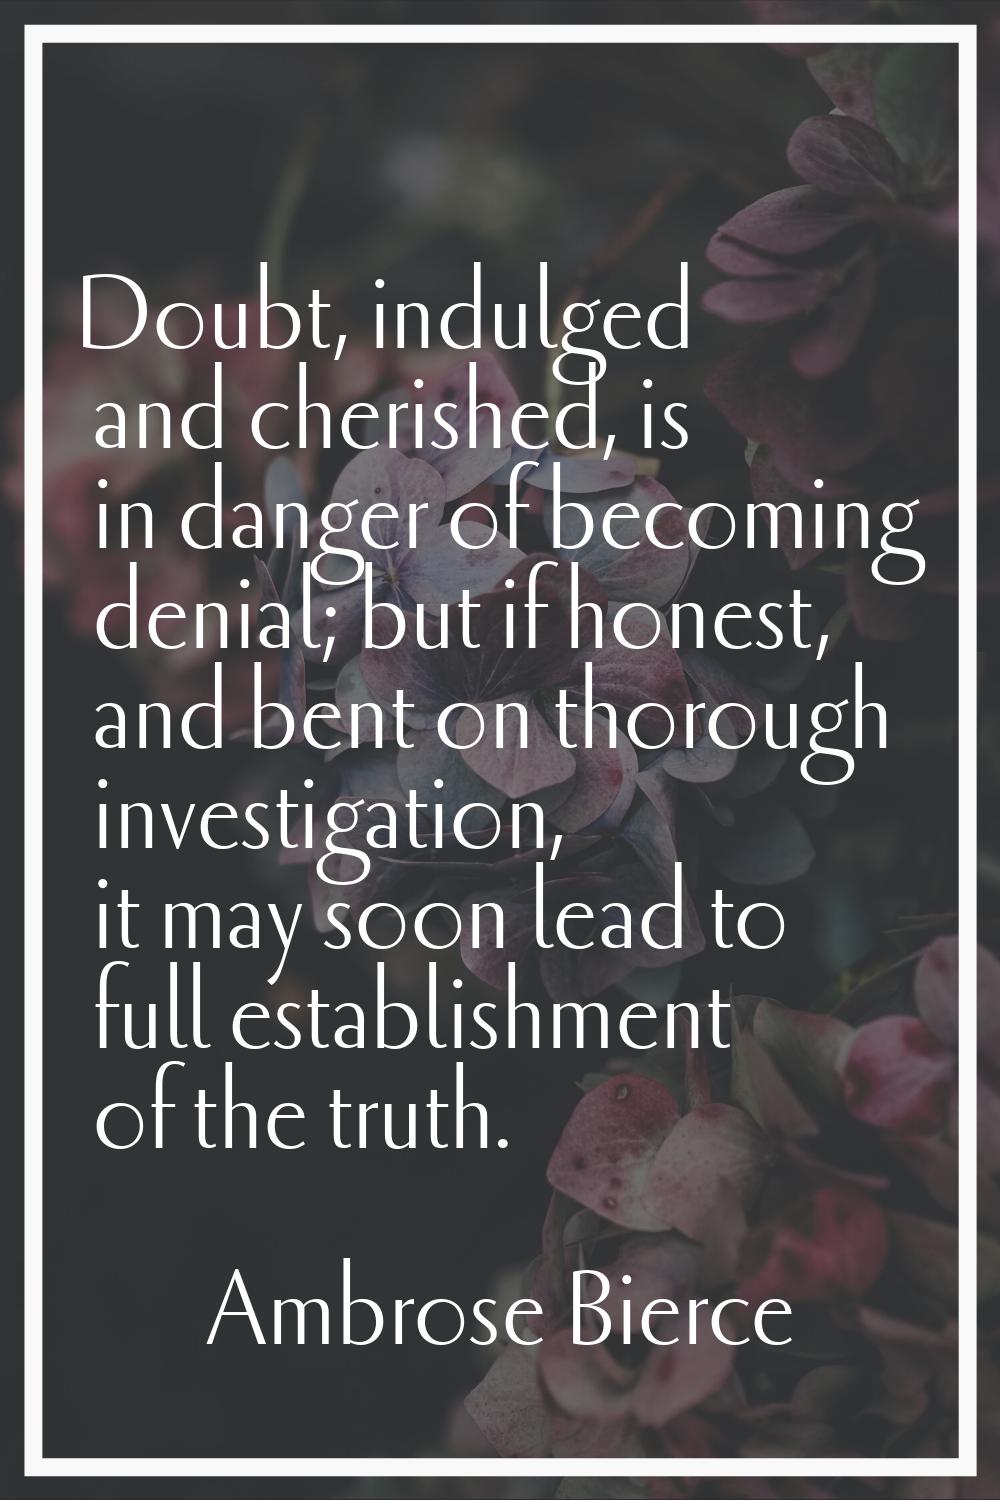 Doubt, indulged and cherished, is in danger of becoming denial; but if honest, and bent on thorough